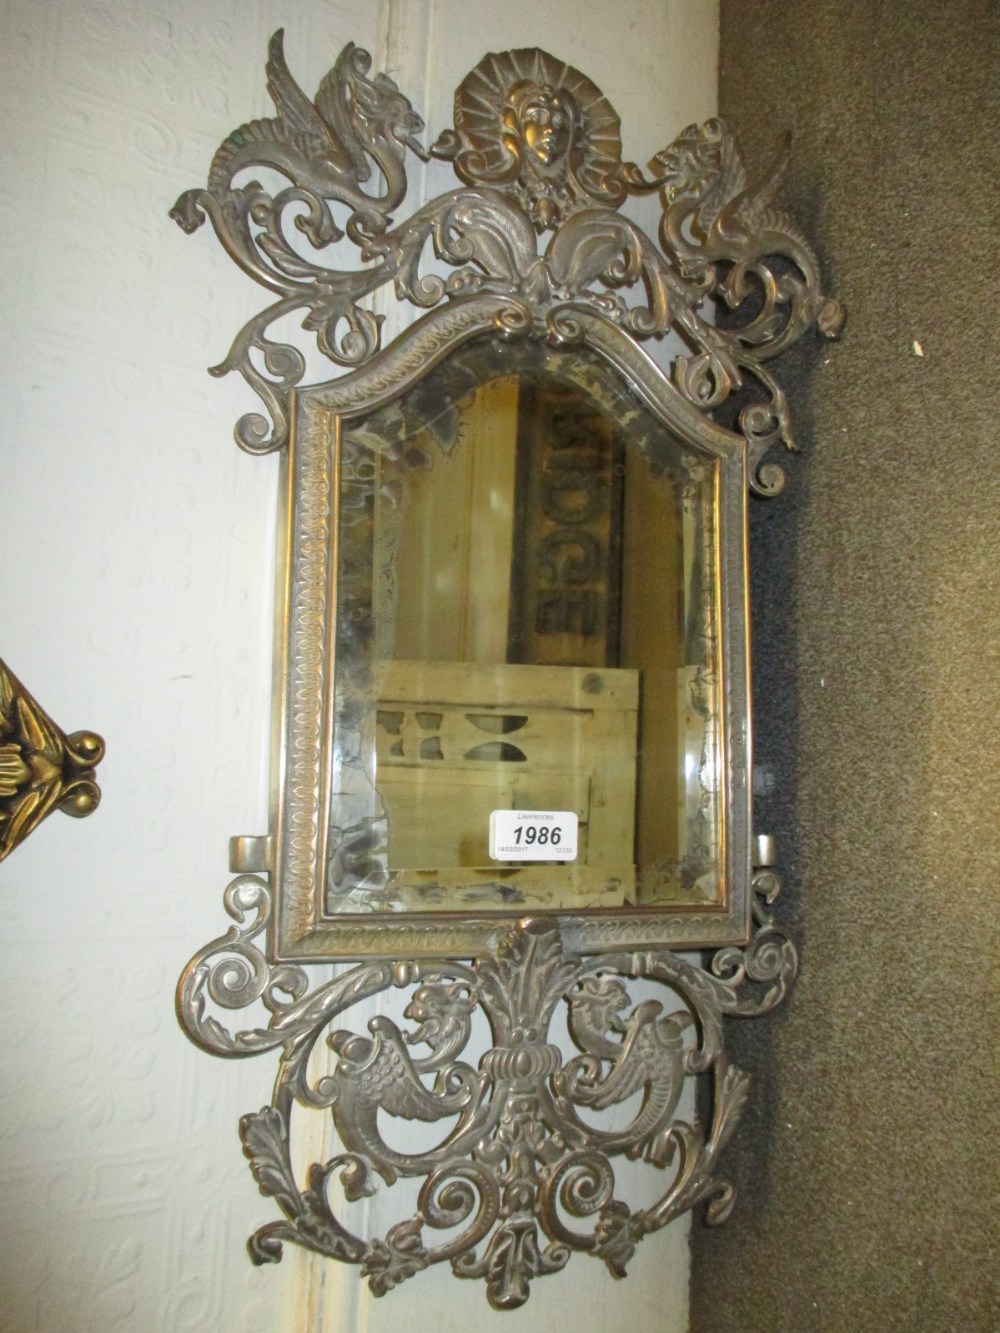 Late 19th or early 20th Century silvered metal wall mirror with pierced gryphon crest surmount